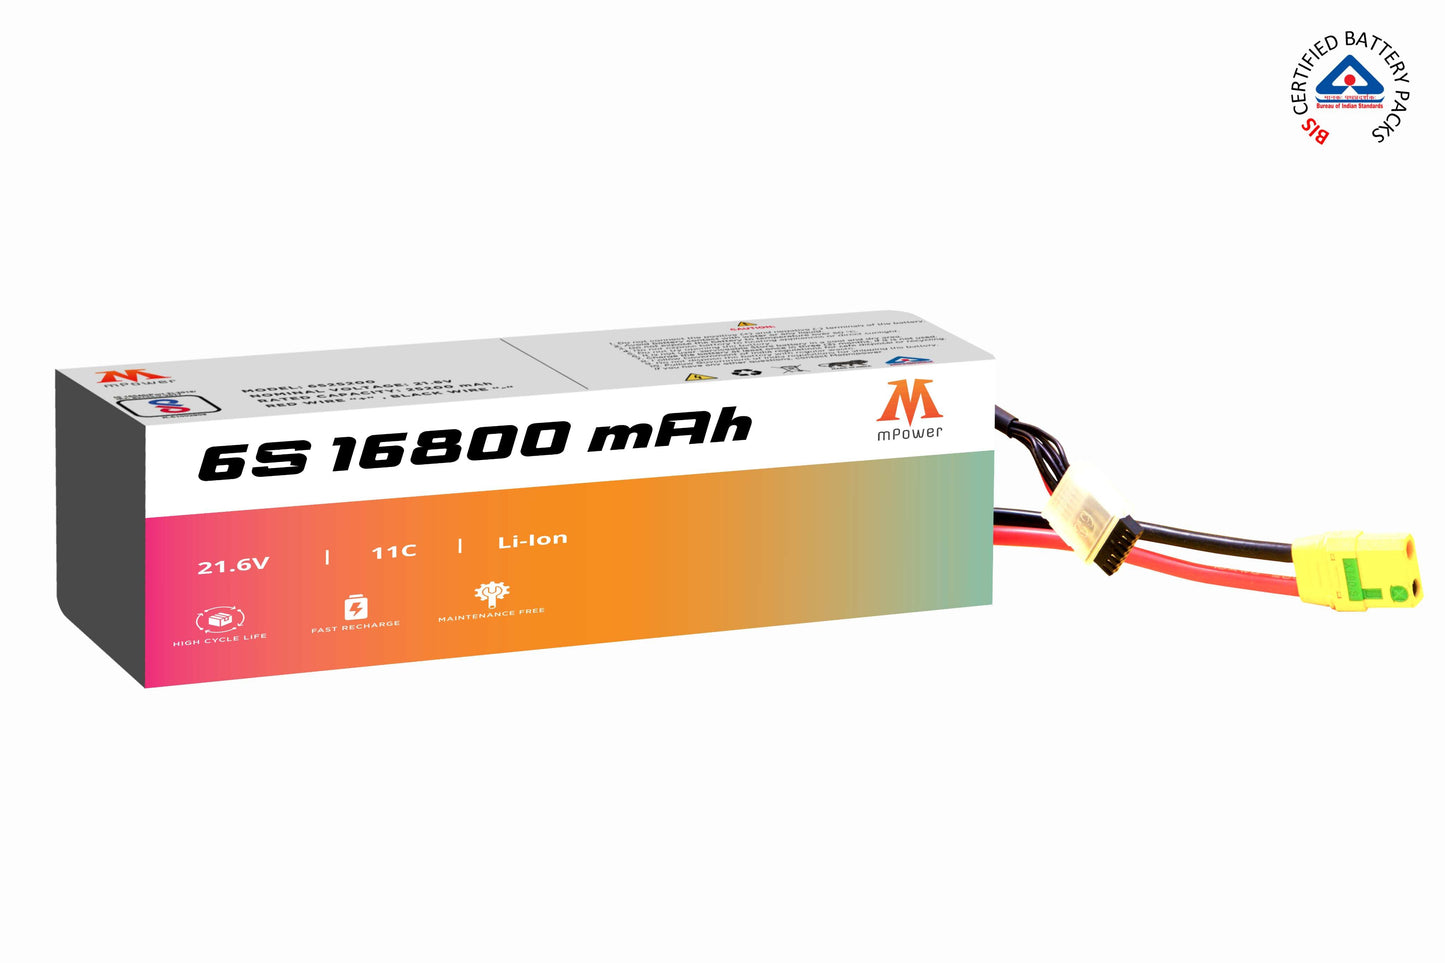 mPower 6S 16800mAh Lithium-ion Battery for Agricultural Spraying Drones